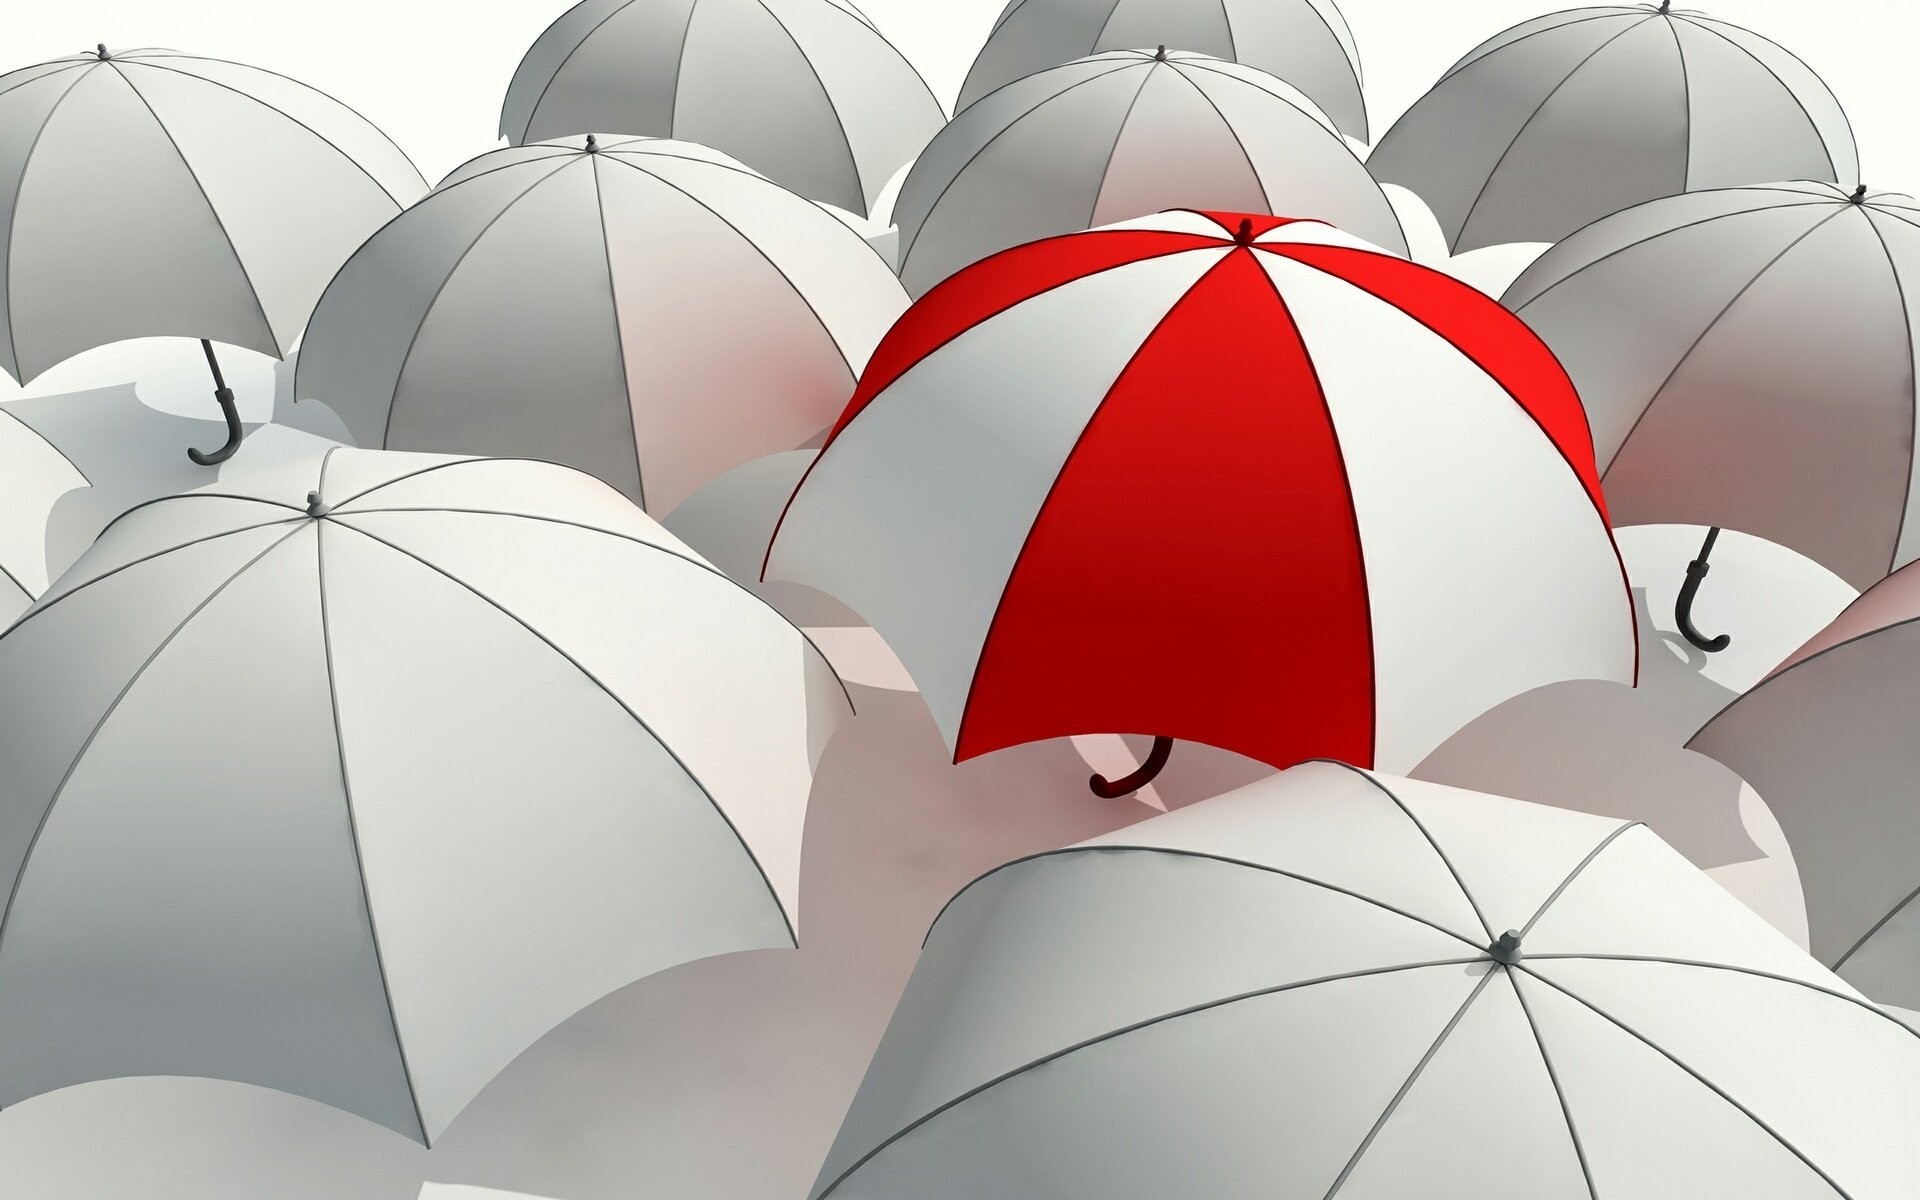 1920x1200 umbrella umbrella umbrella grayness contrast red white grey stand out from  the crowd